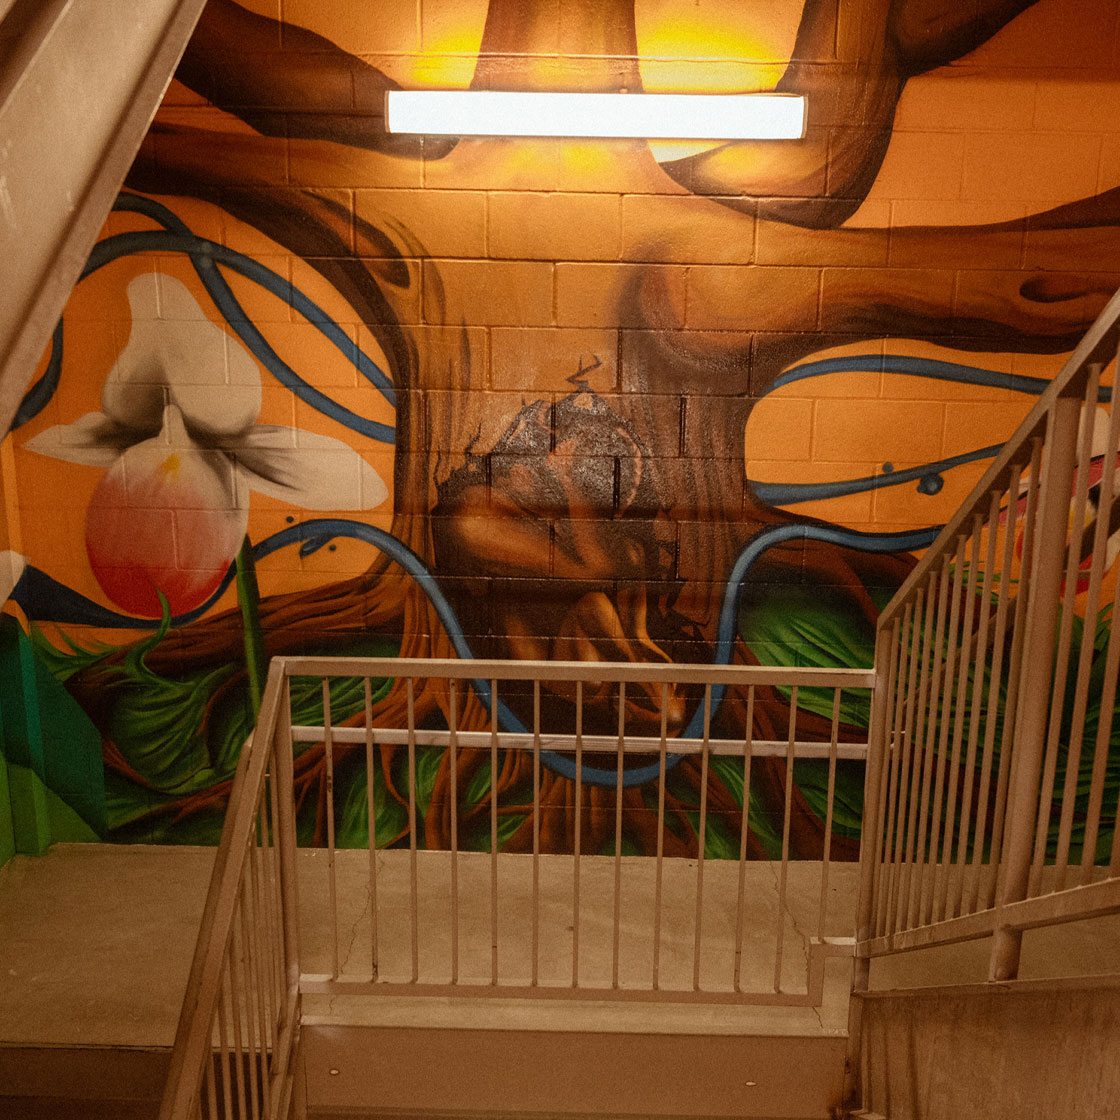 A painting in an indoor staircase of a large tree with a fetus-like figure in a womb-like position